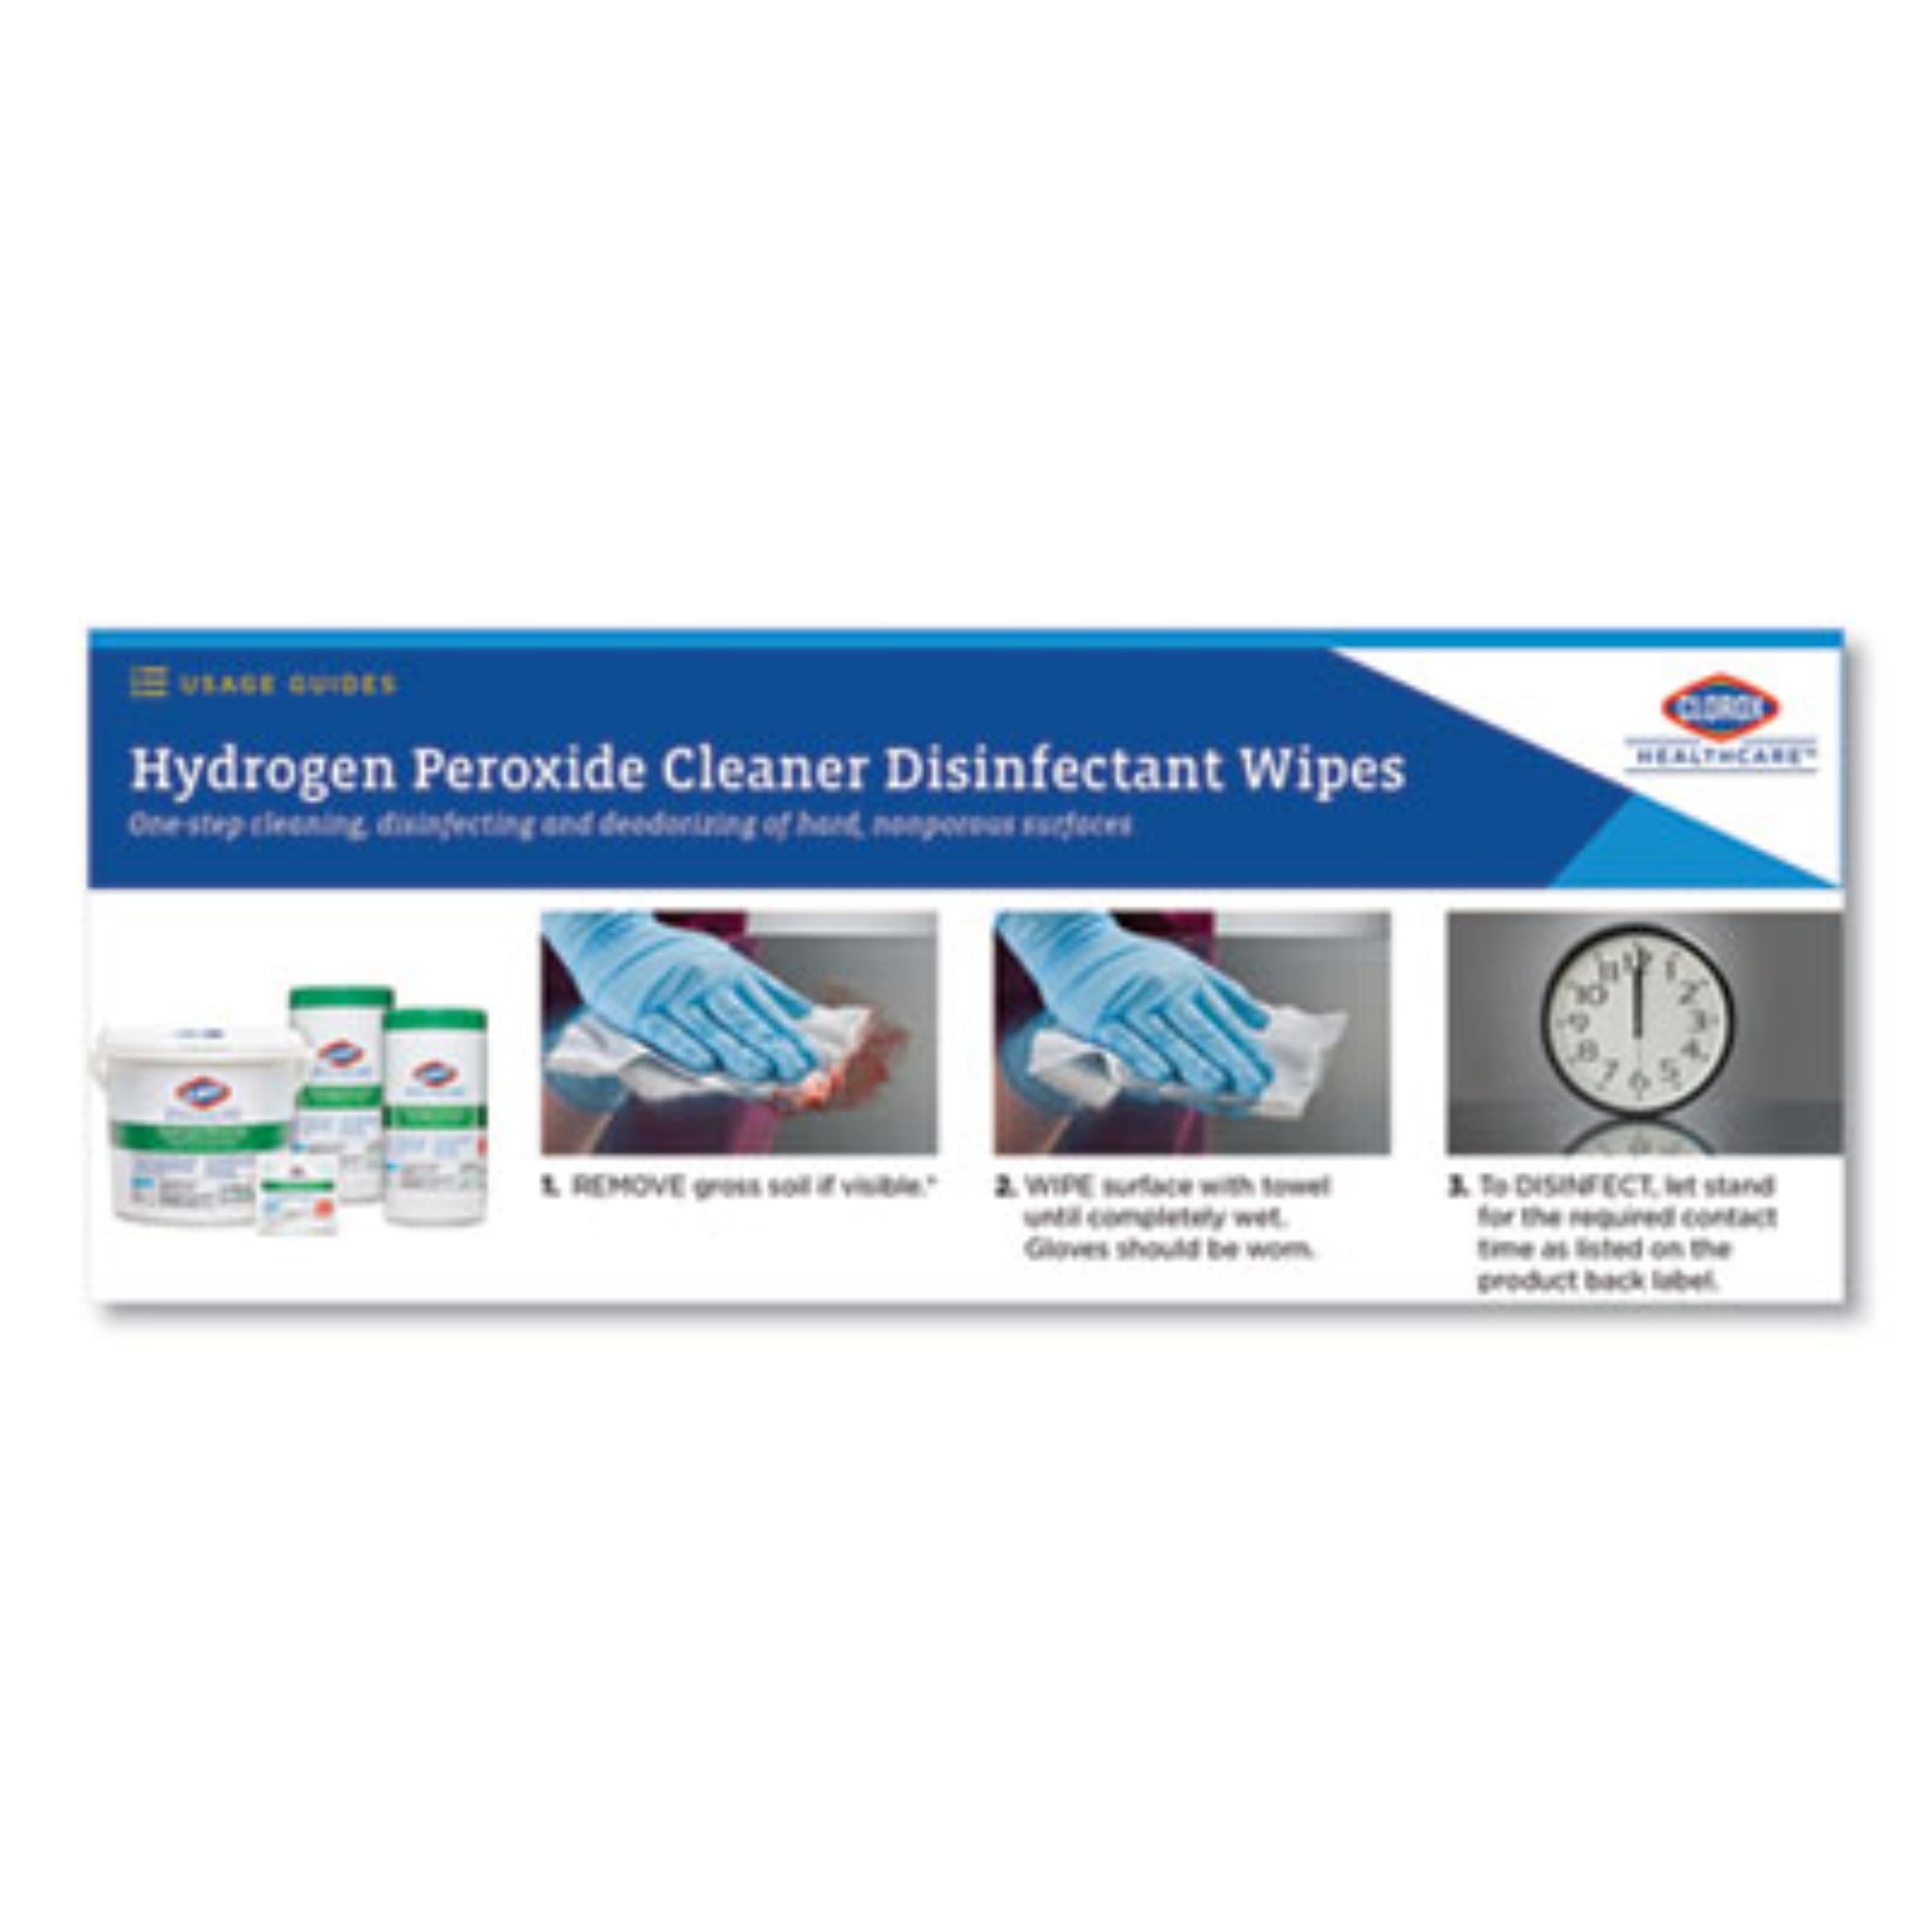 CLOROX SALES CO. CLO30825 Hydrogen Peroxide Cleaner Disinfectant Wipes, Application